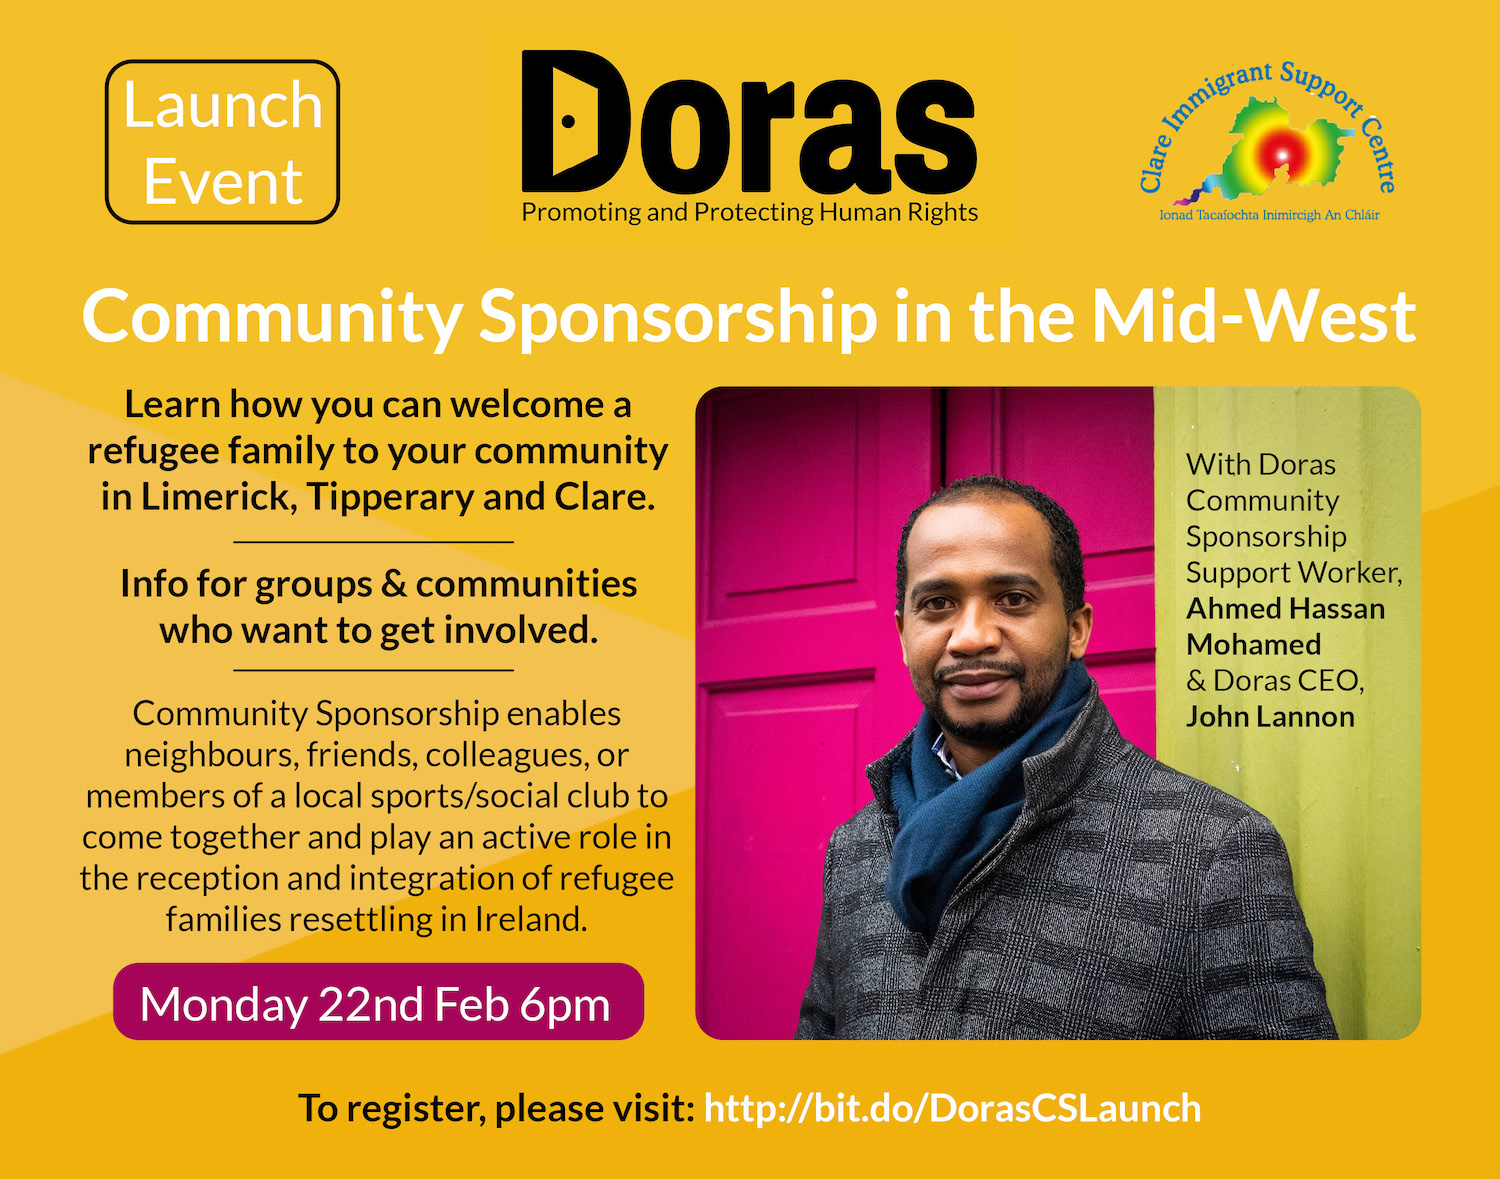 Doras Community Sponsorship programme is running an event this Monday, February 22